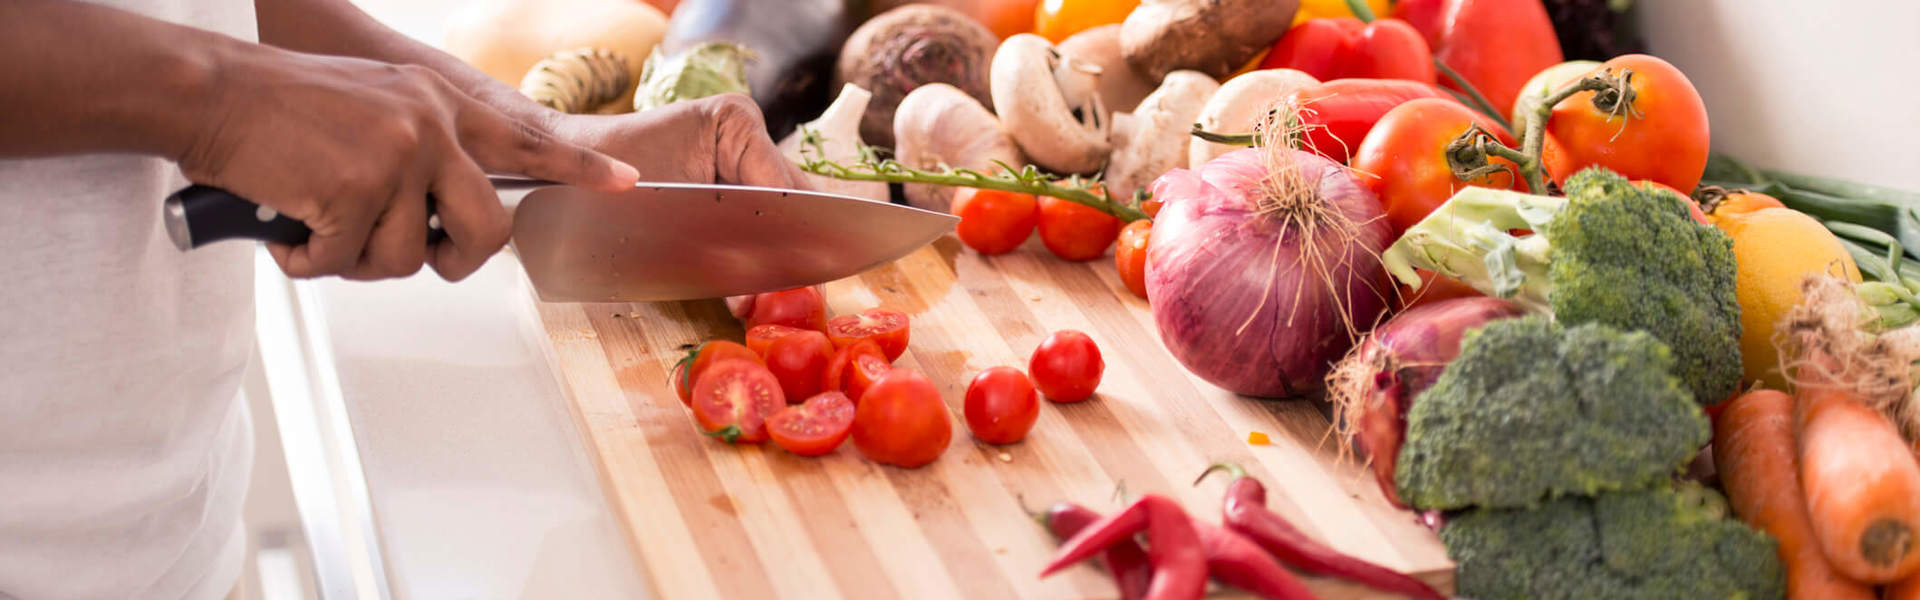 tomatoes being chopped on a wooden chopping board with various vegetables in the background